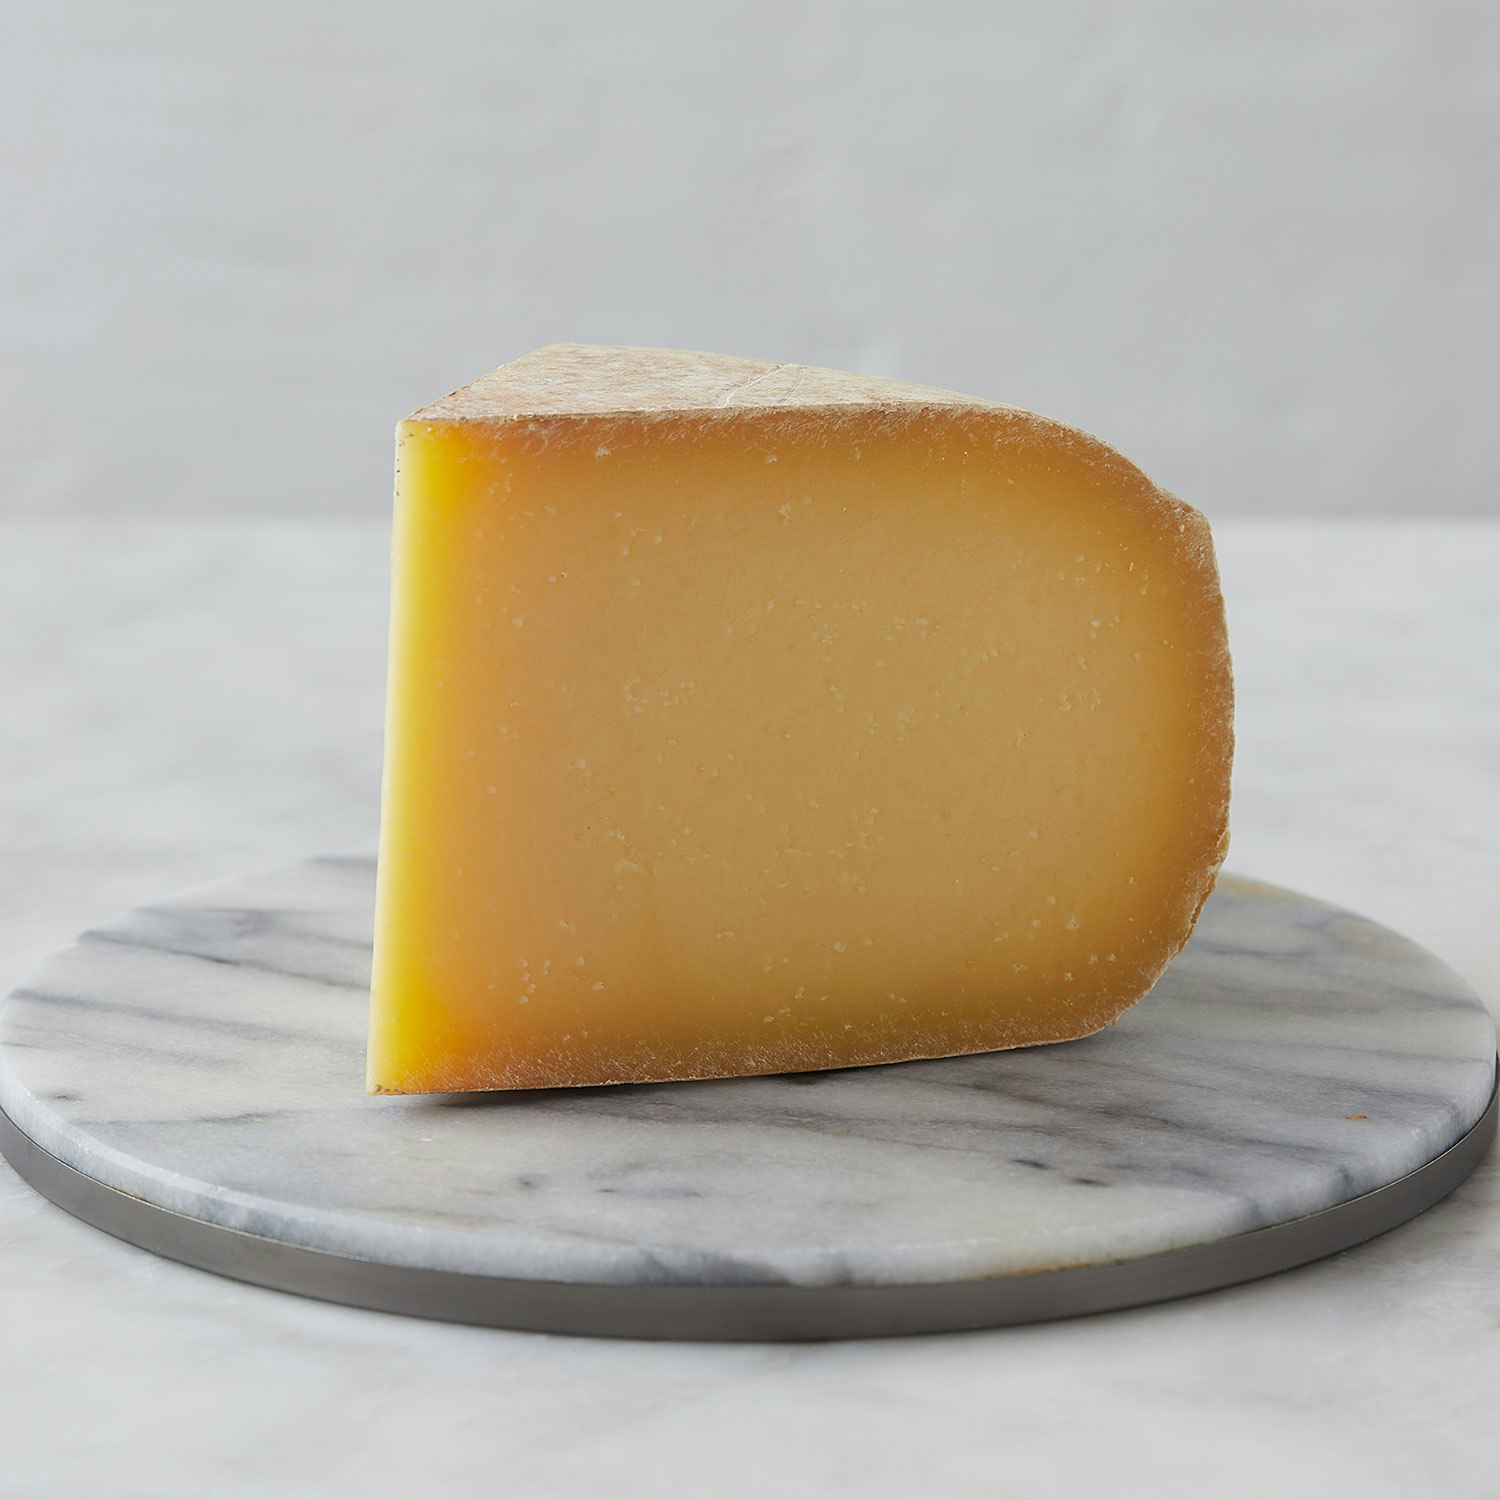 Uplands Cheese Company Pleasant Ridge Reserve Extra Aged